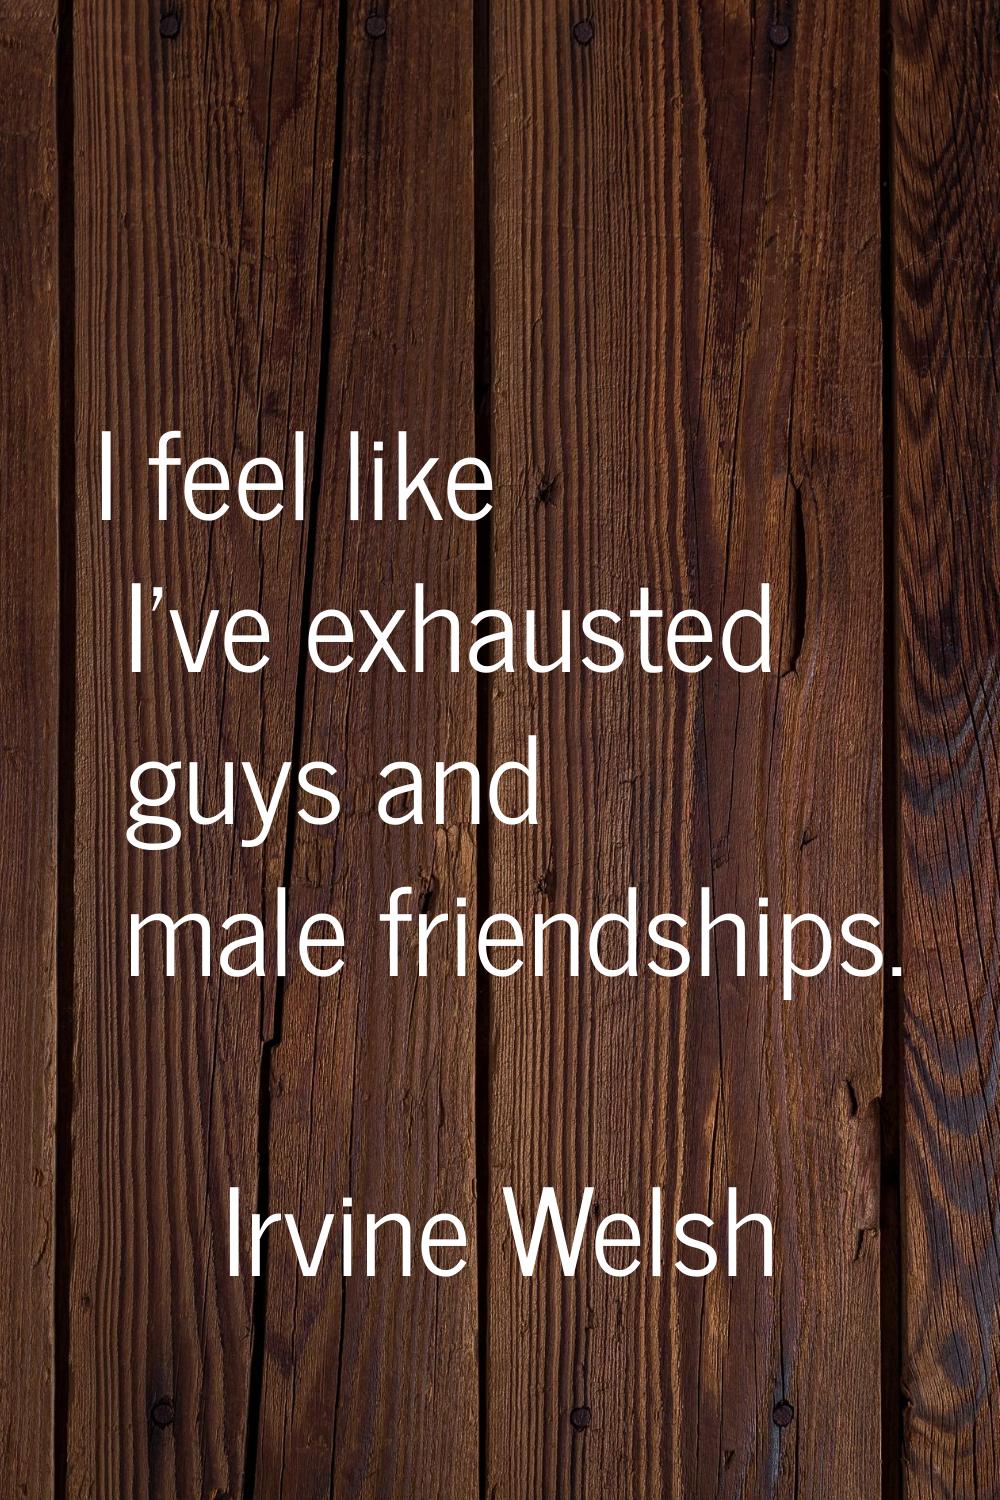 I feel like I've exhausted guys and male friendships.